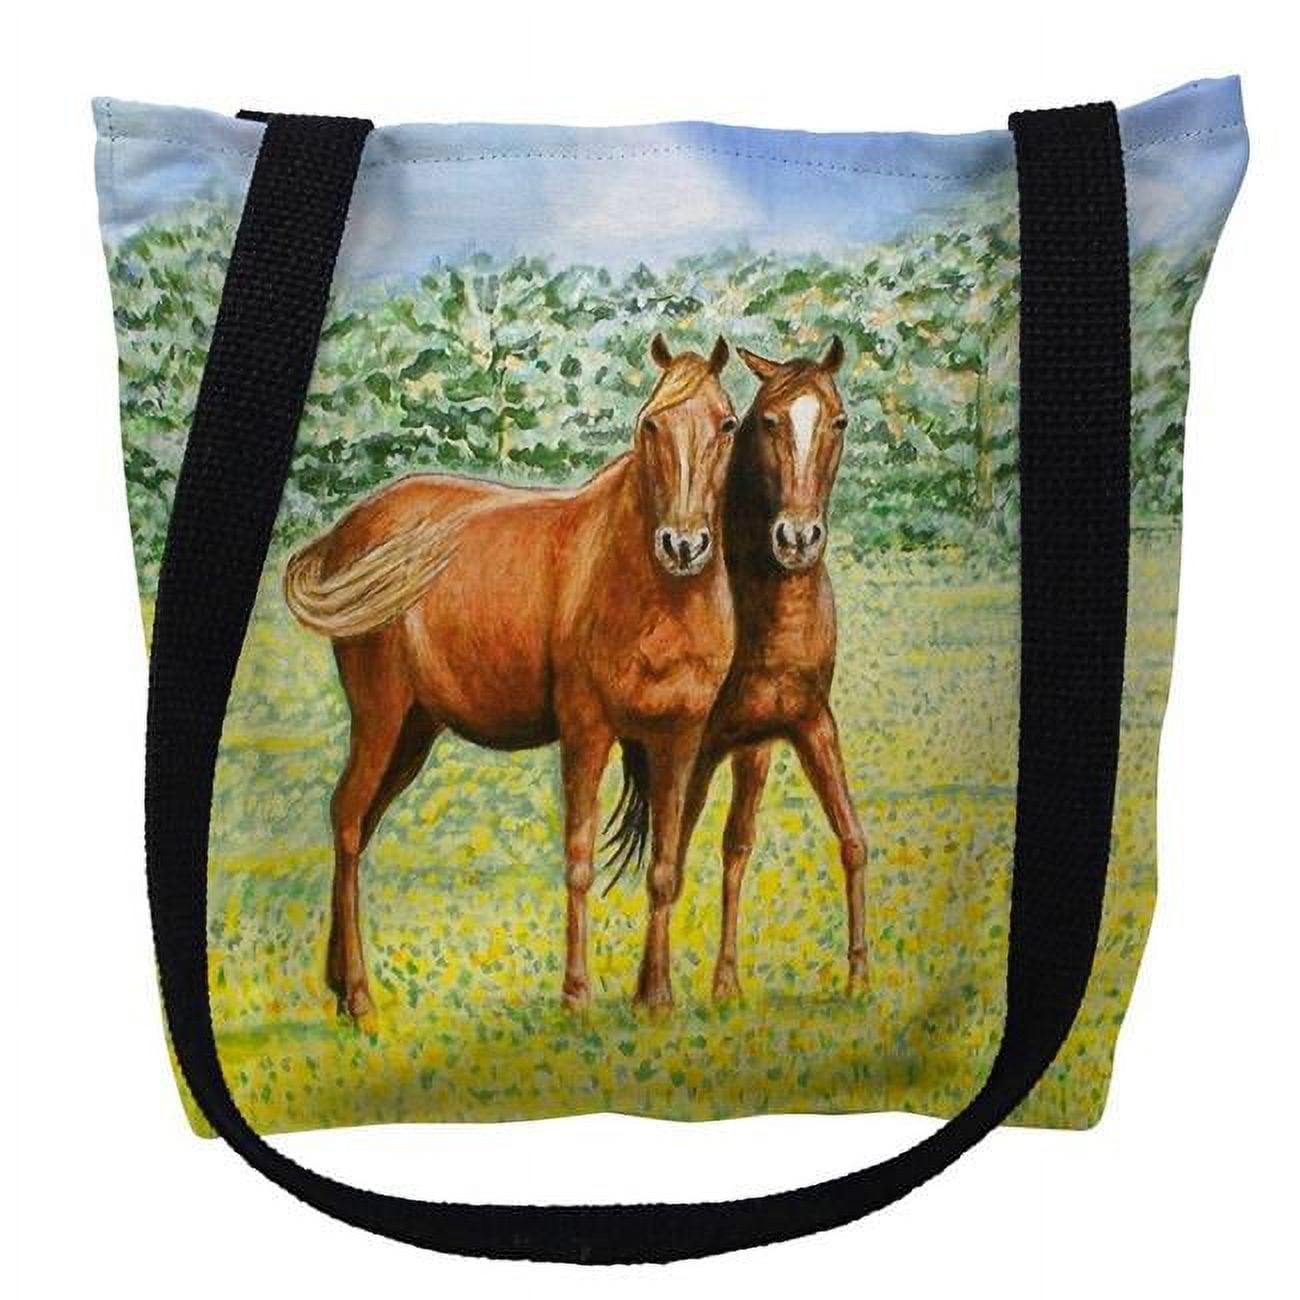 Ty057m 16 X 16 In. Two Horses Tote Bag - Medium